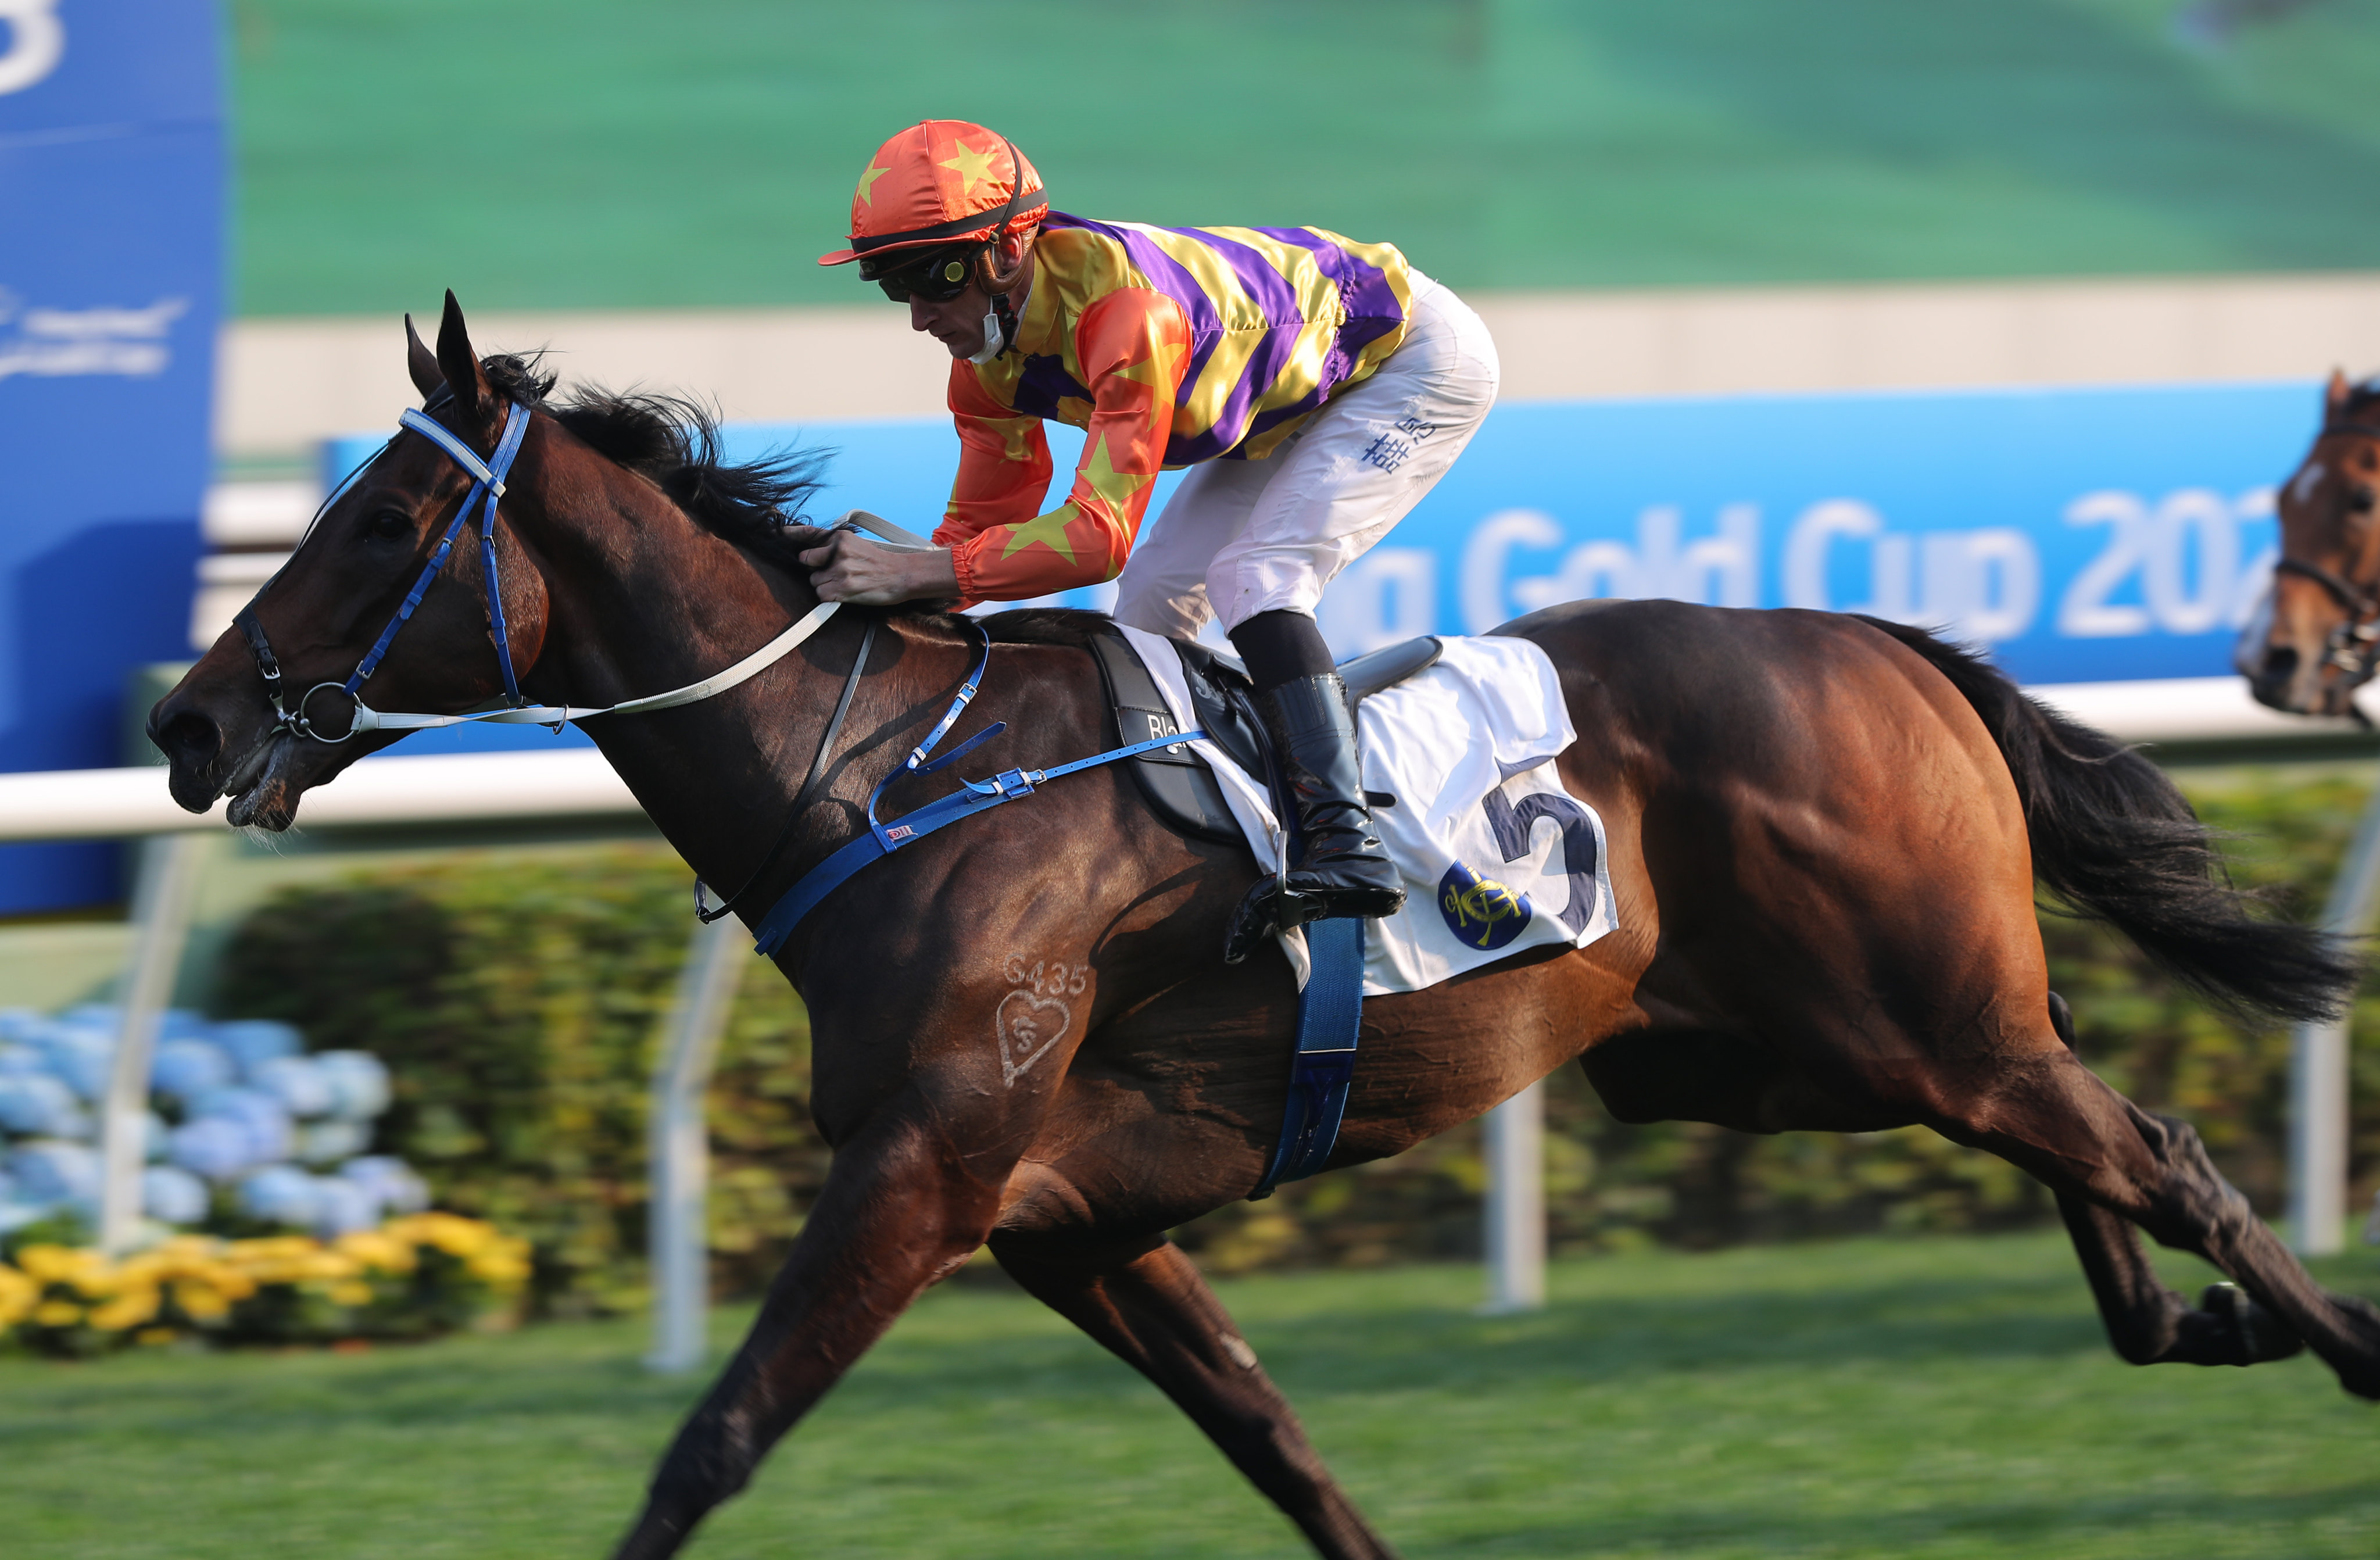 Straight Arron wins a Class Three race over 1,800m under Blake Shinn at Sha Tin on February 26 to book his place in the BMW Hong Kong Derby. Photo: Kenneth Chan